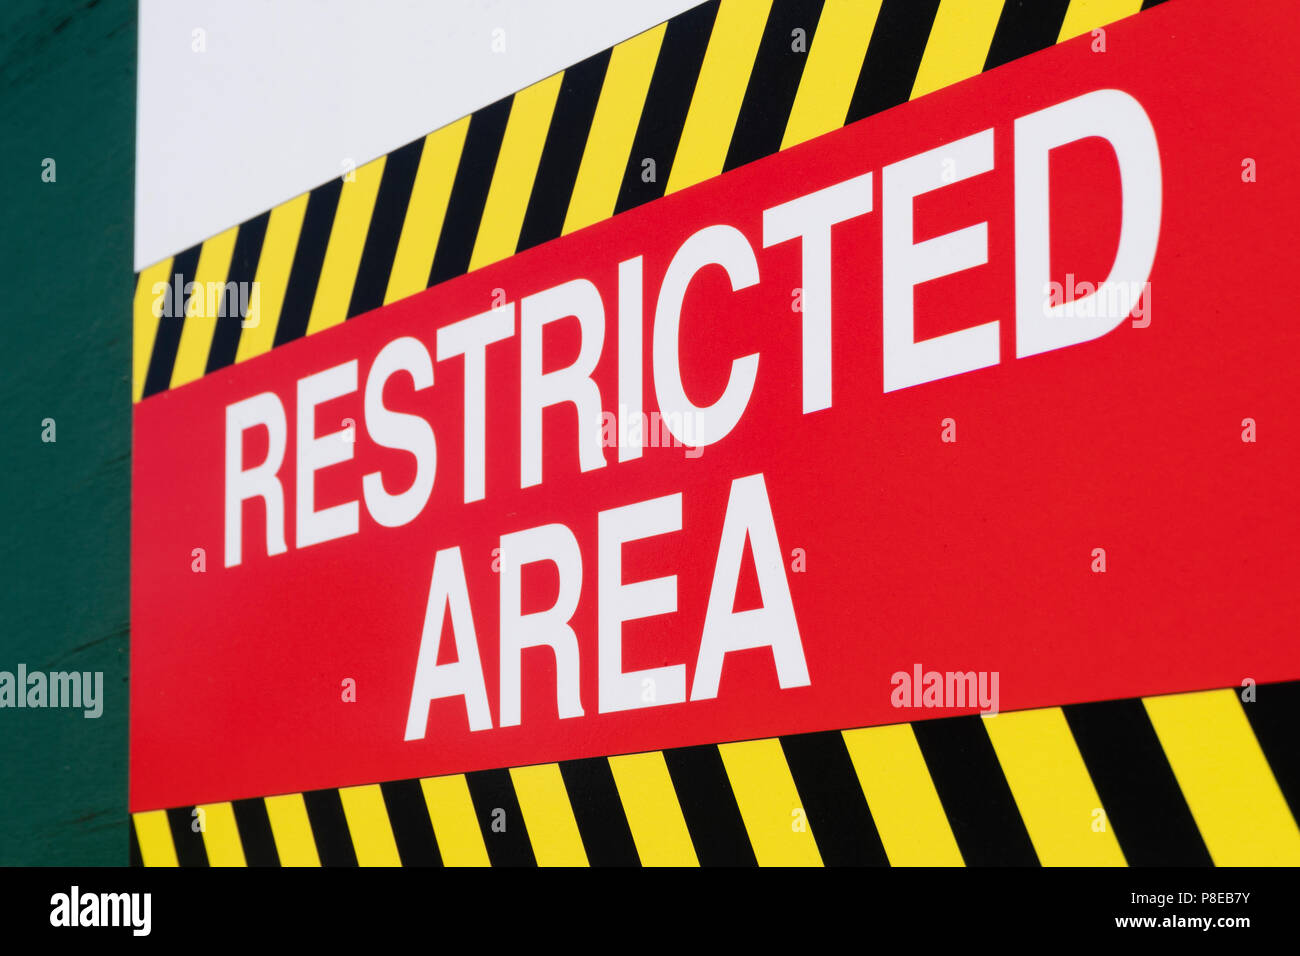 Restricted area sign Stock Photo